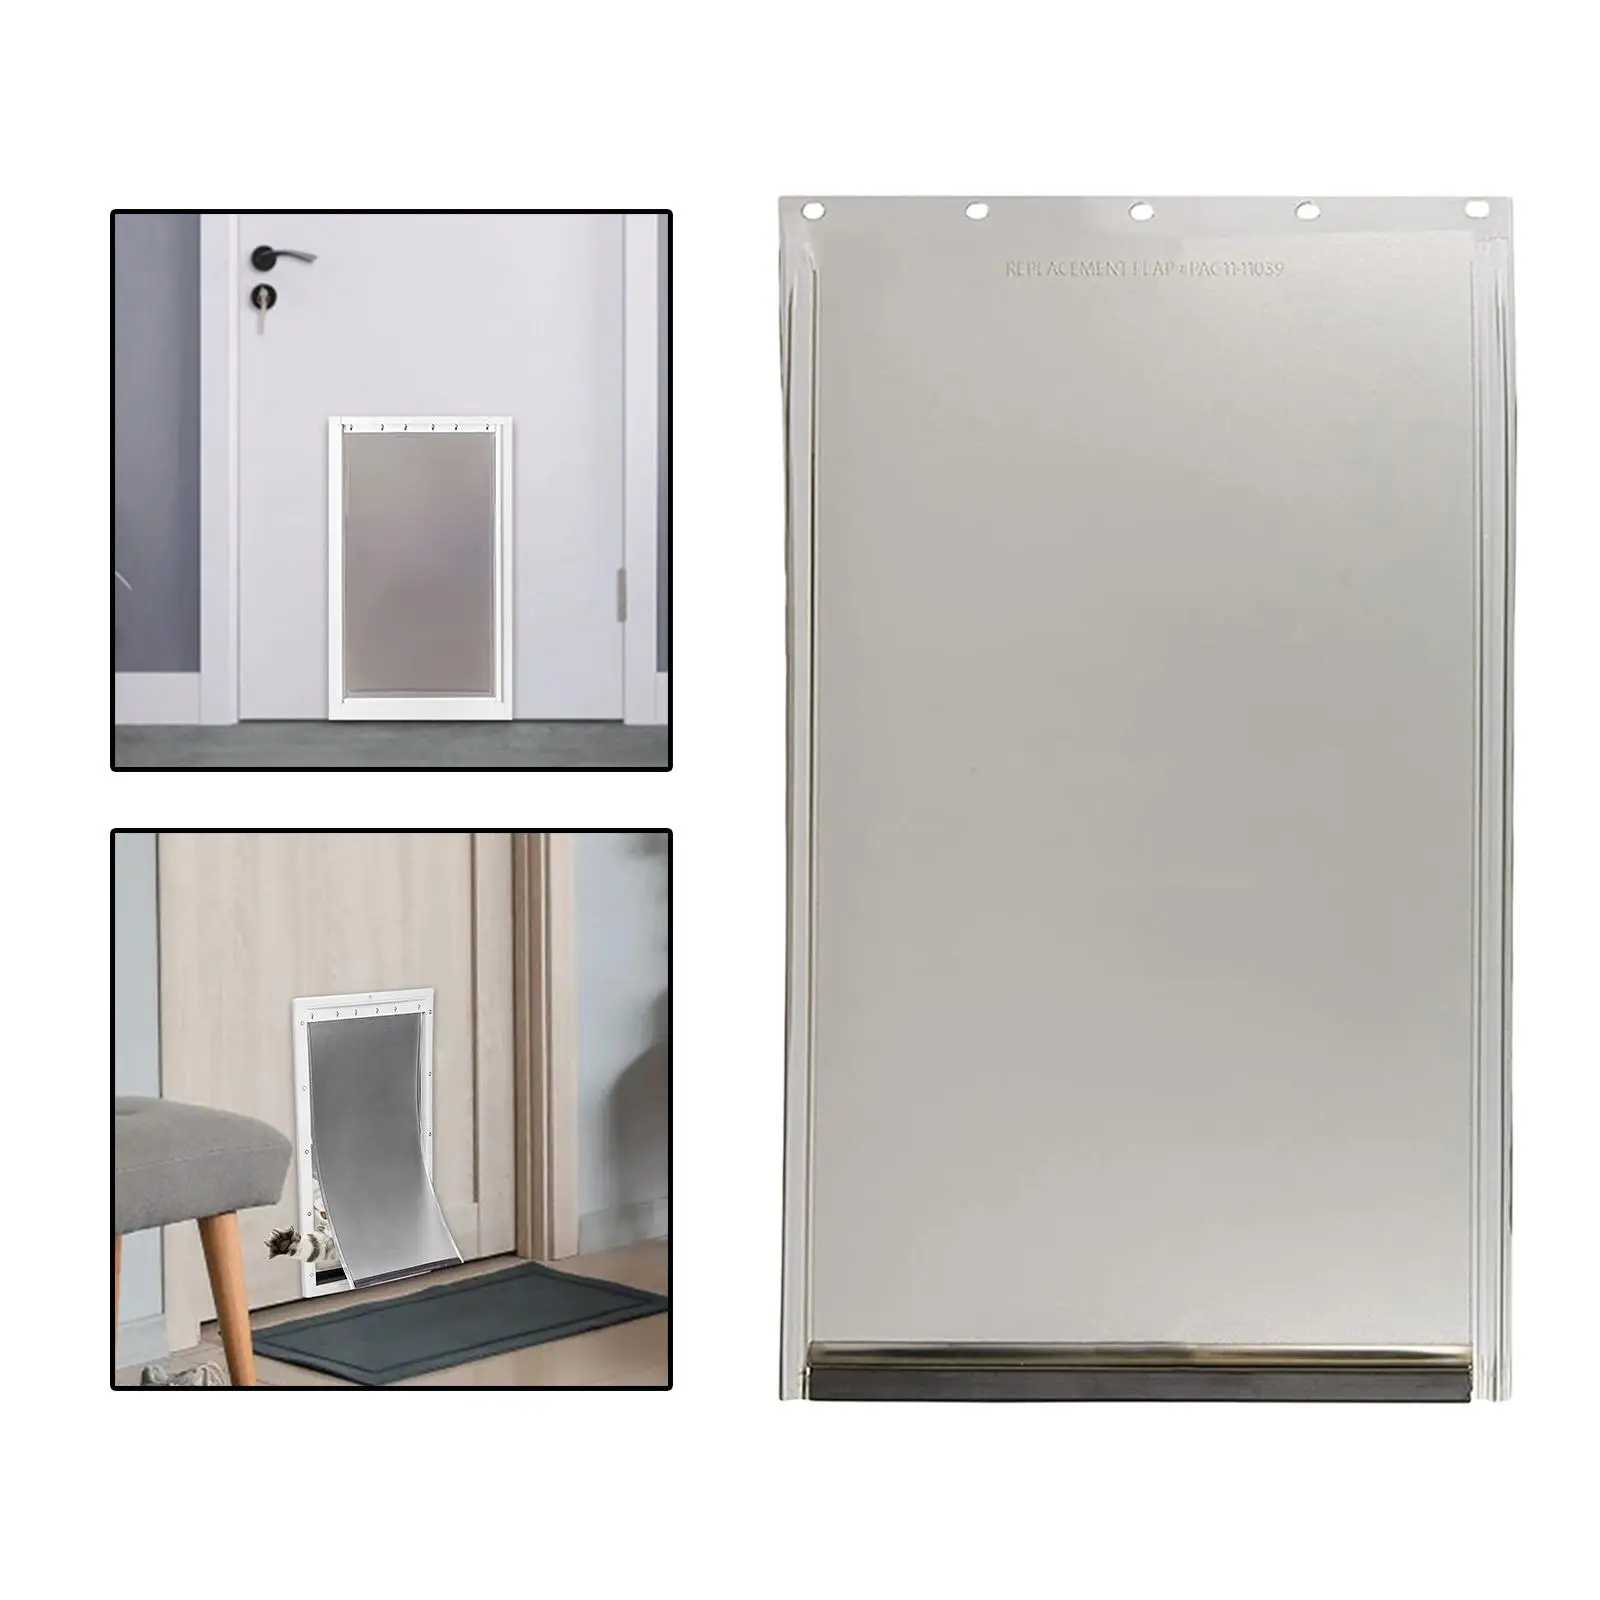 Durable Replacement Dog Door Flap Replace Compatible with Puppy and Kitten